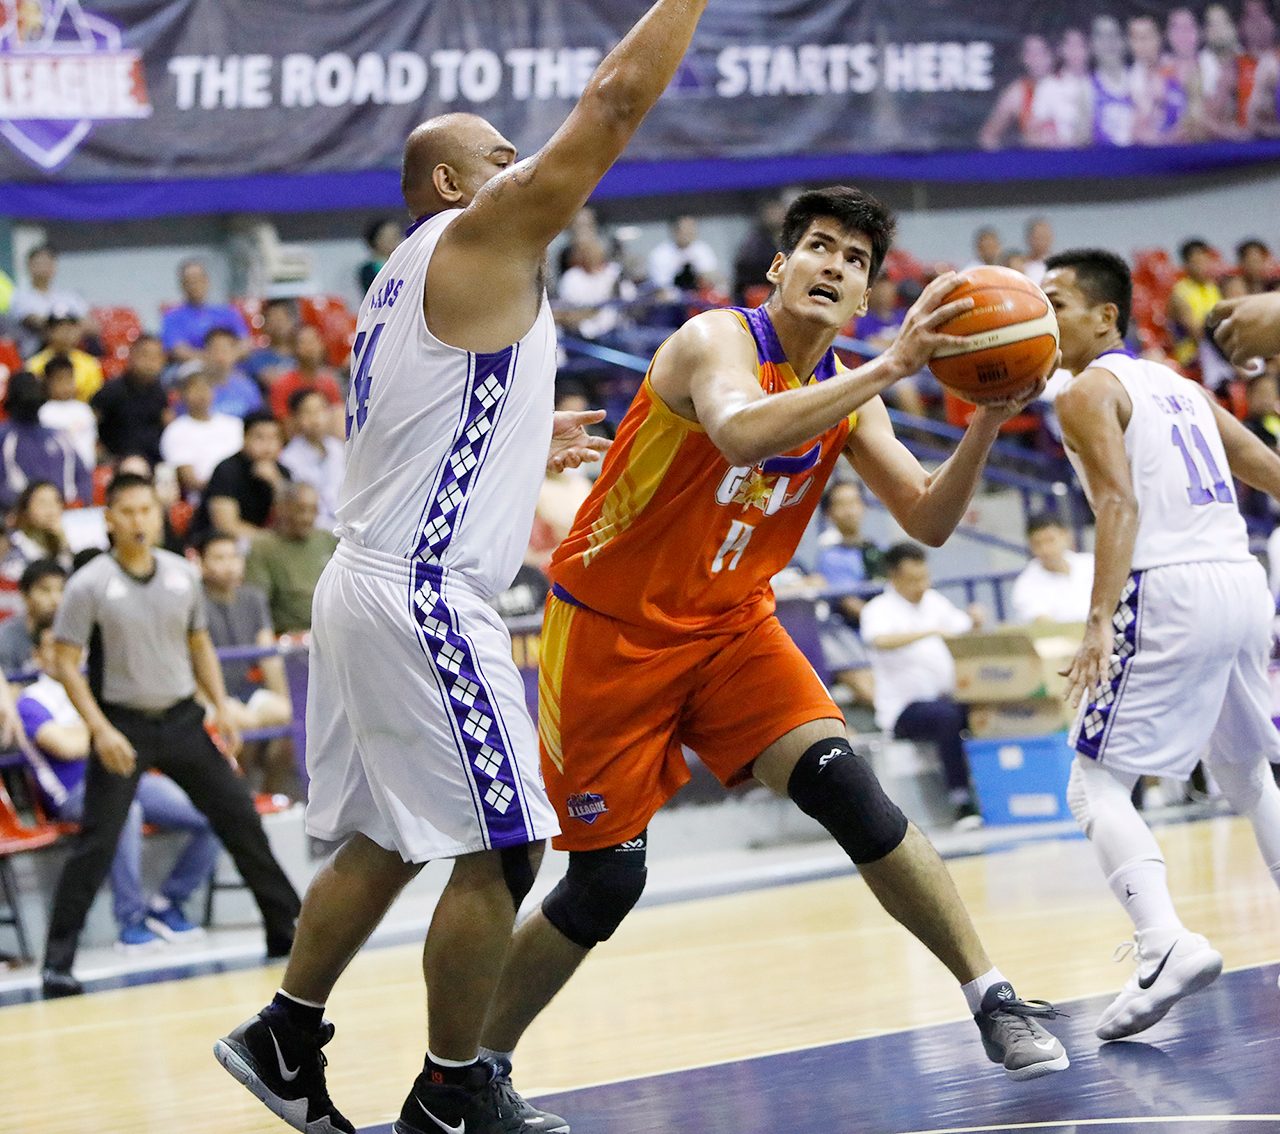 Jeff Viernes lifts Che’lu in Game 1 stunner